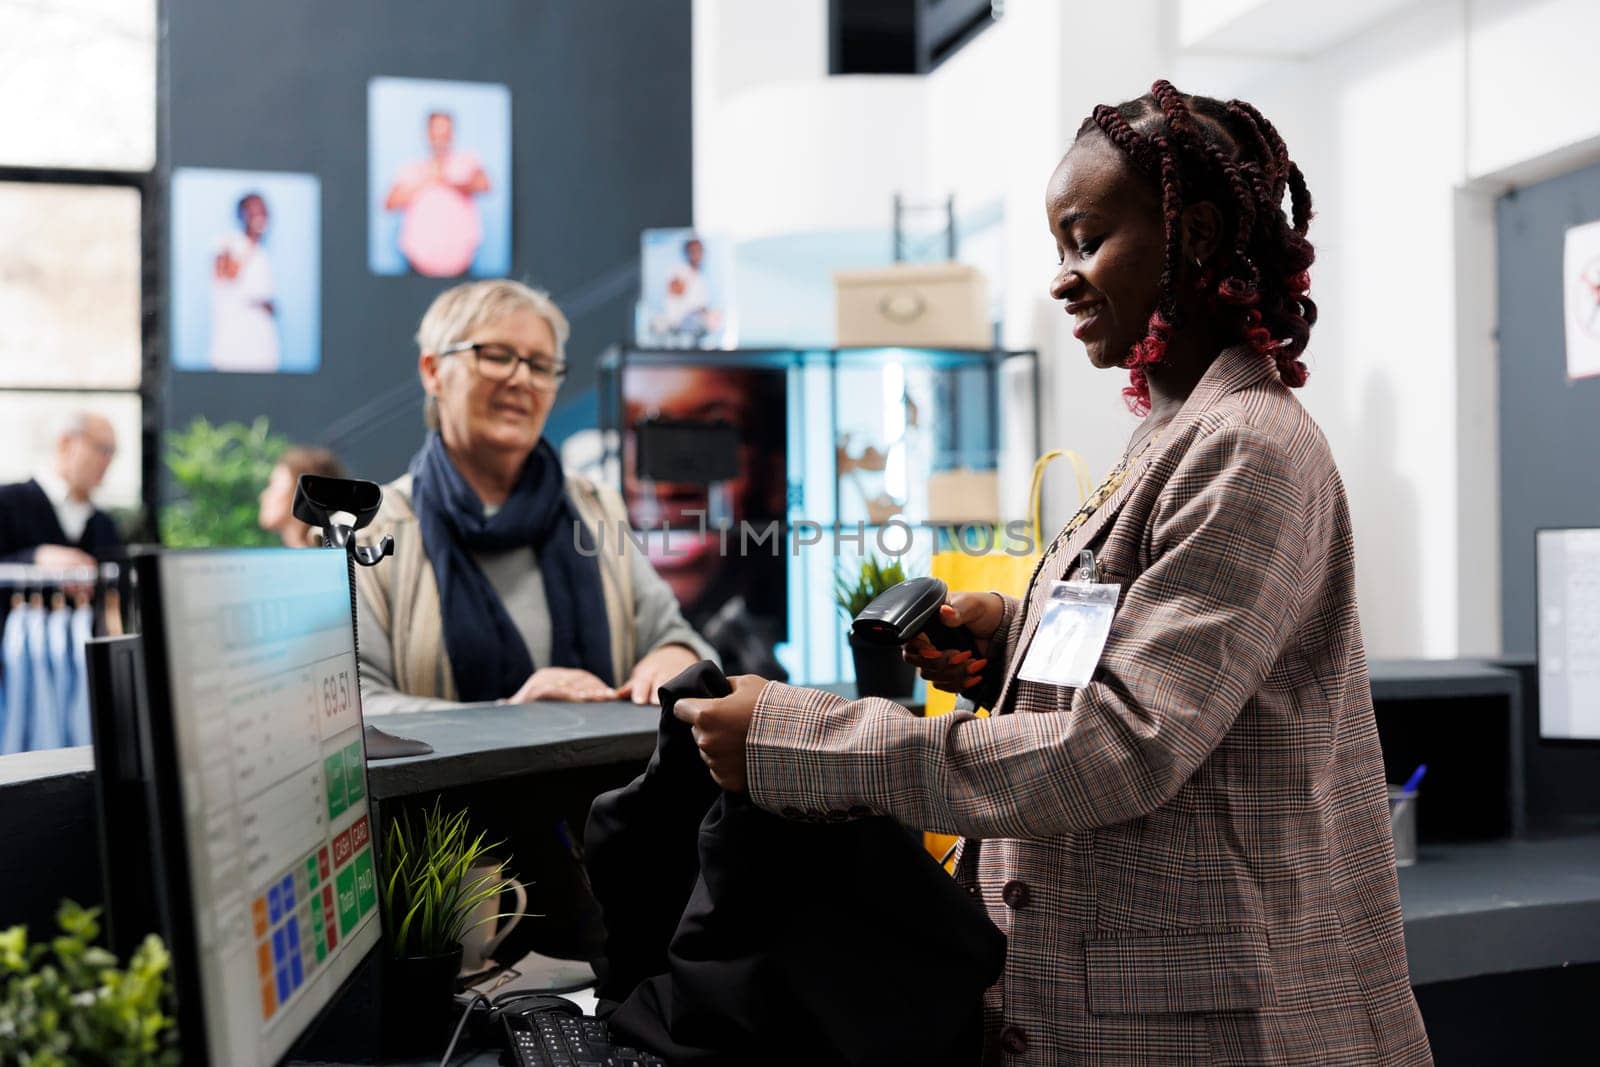 African american employee scanning blouse barcode using store scanner, discussing merchandise discount with elderly customer. Senior shopper buying fashionable clothes in boutique shop